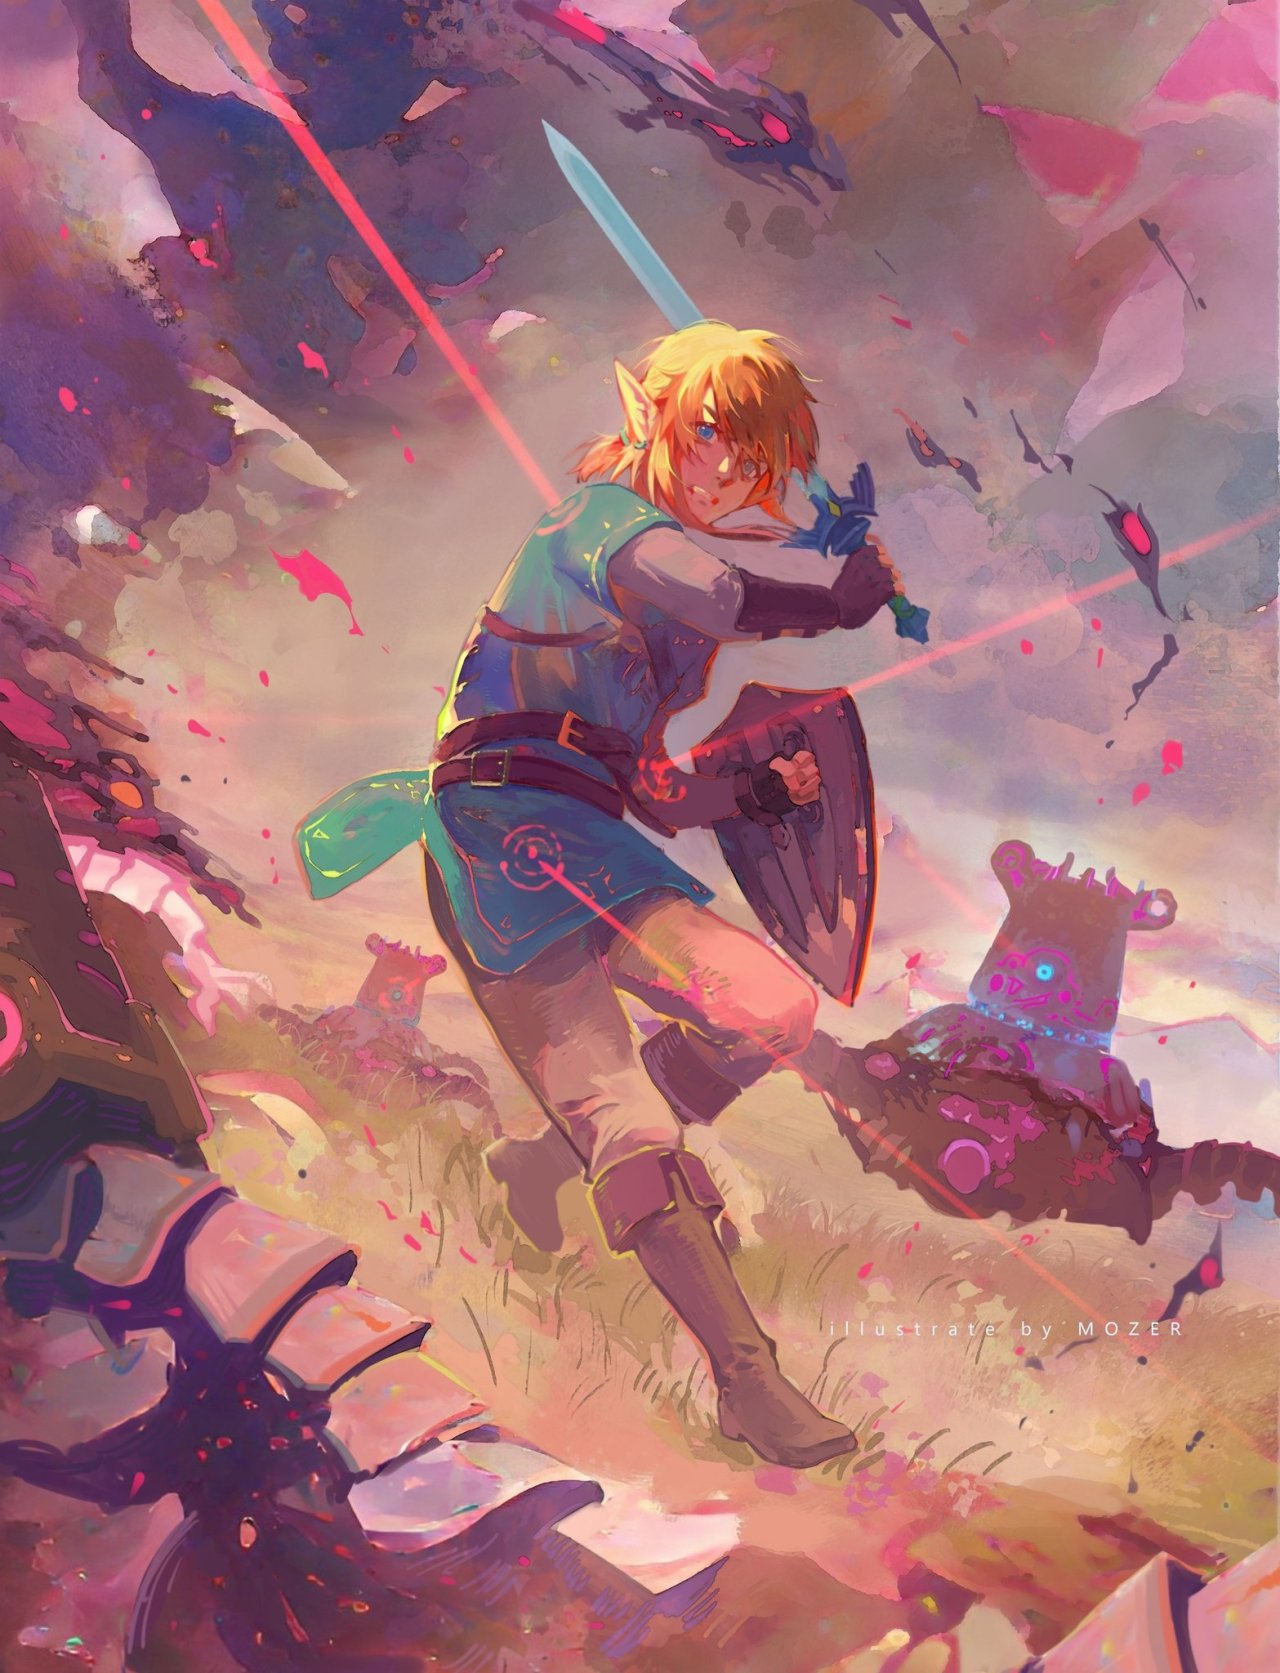 Breath of the Wild Fan Art - Created by Mozer You can follow this artist on Twitter.